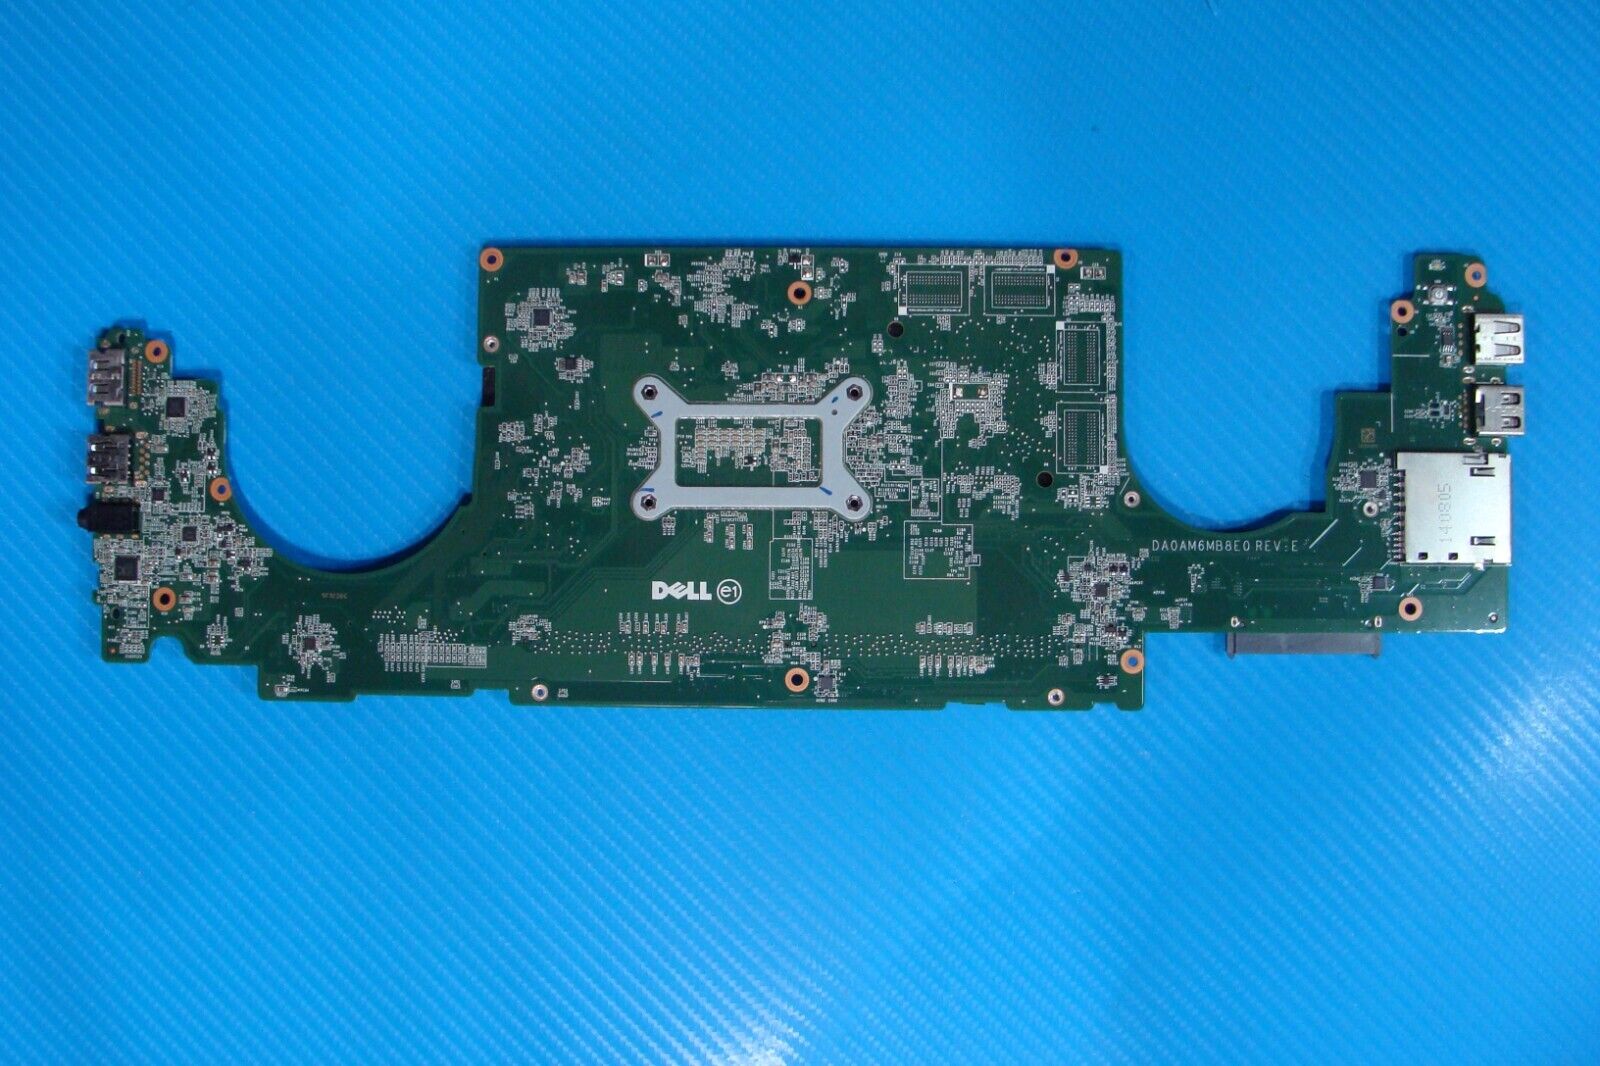 Dell Inspiron 15.6” 15 7547 i7-4510U 2.0GHz Motherboard DA0AM6MB8E0 H1XYW AS IS